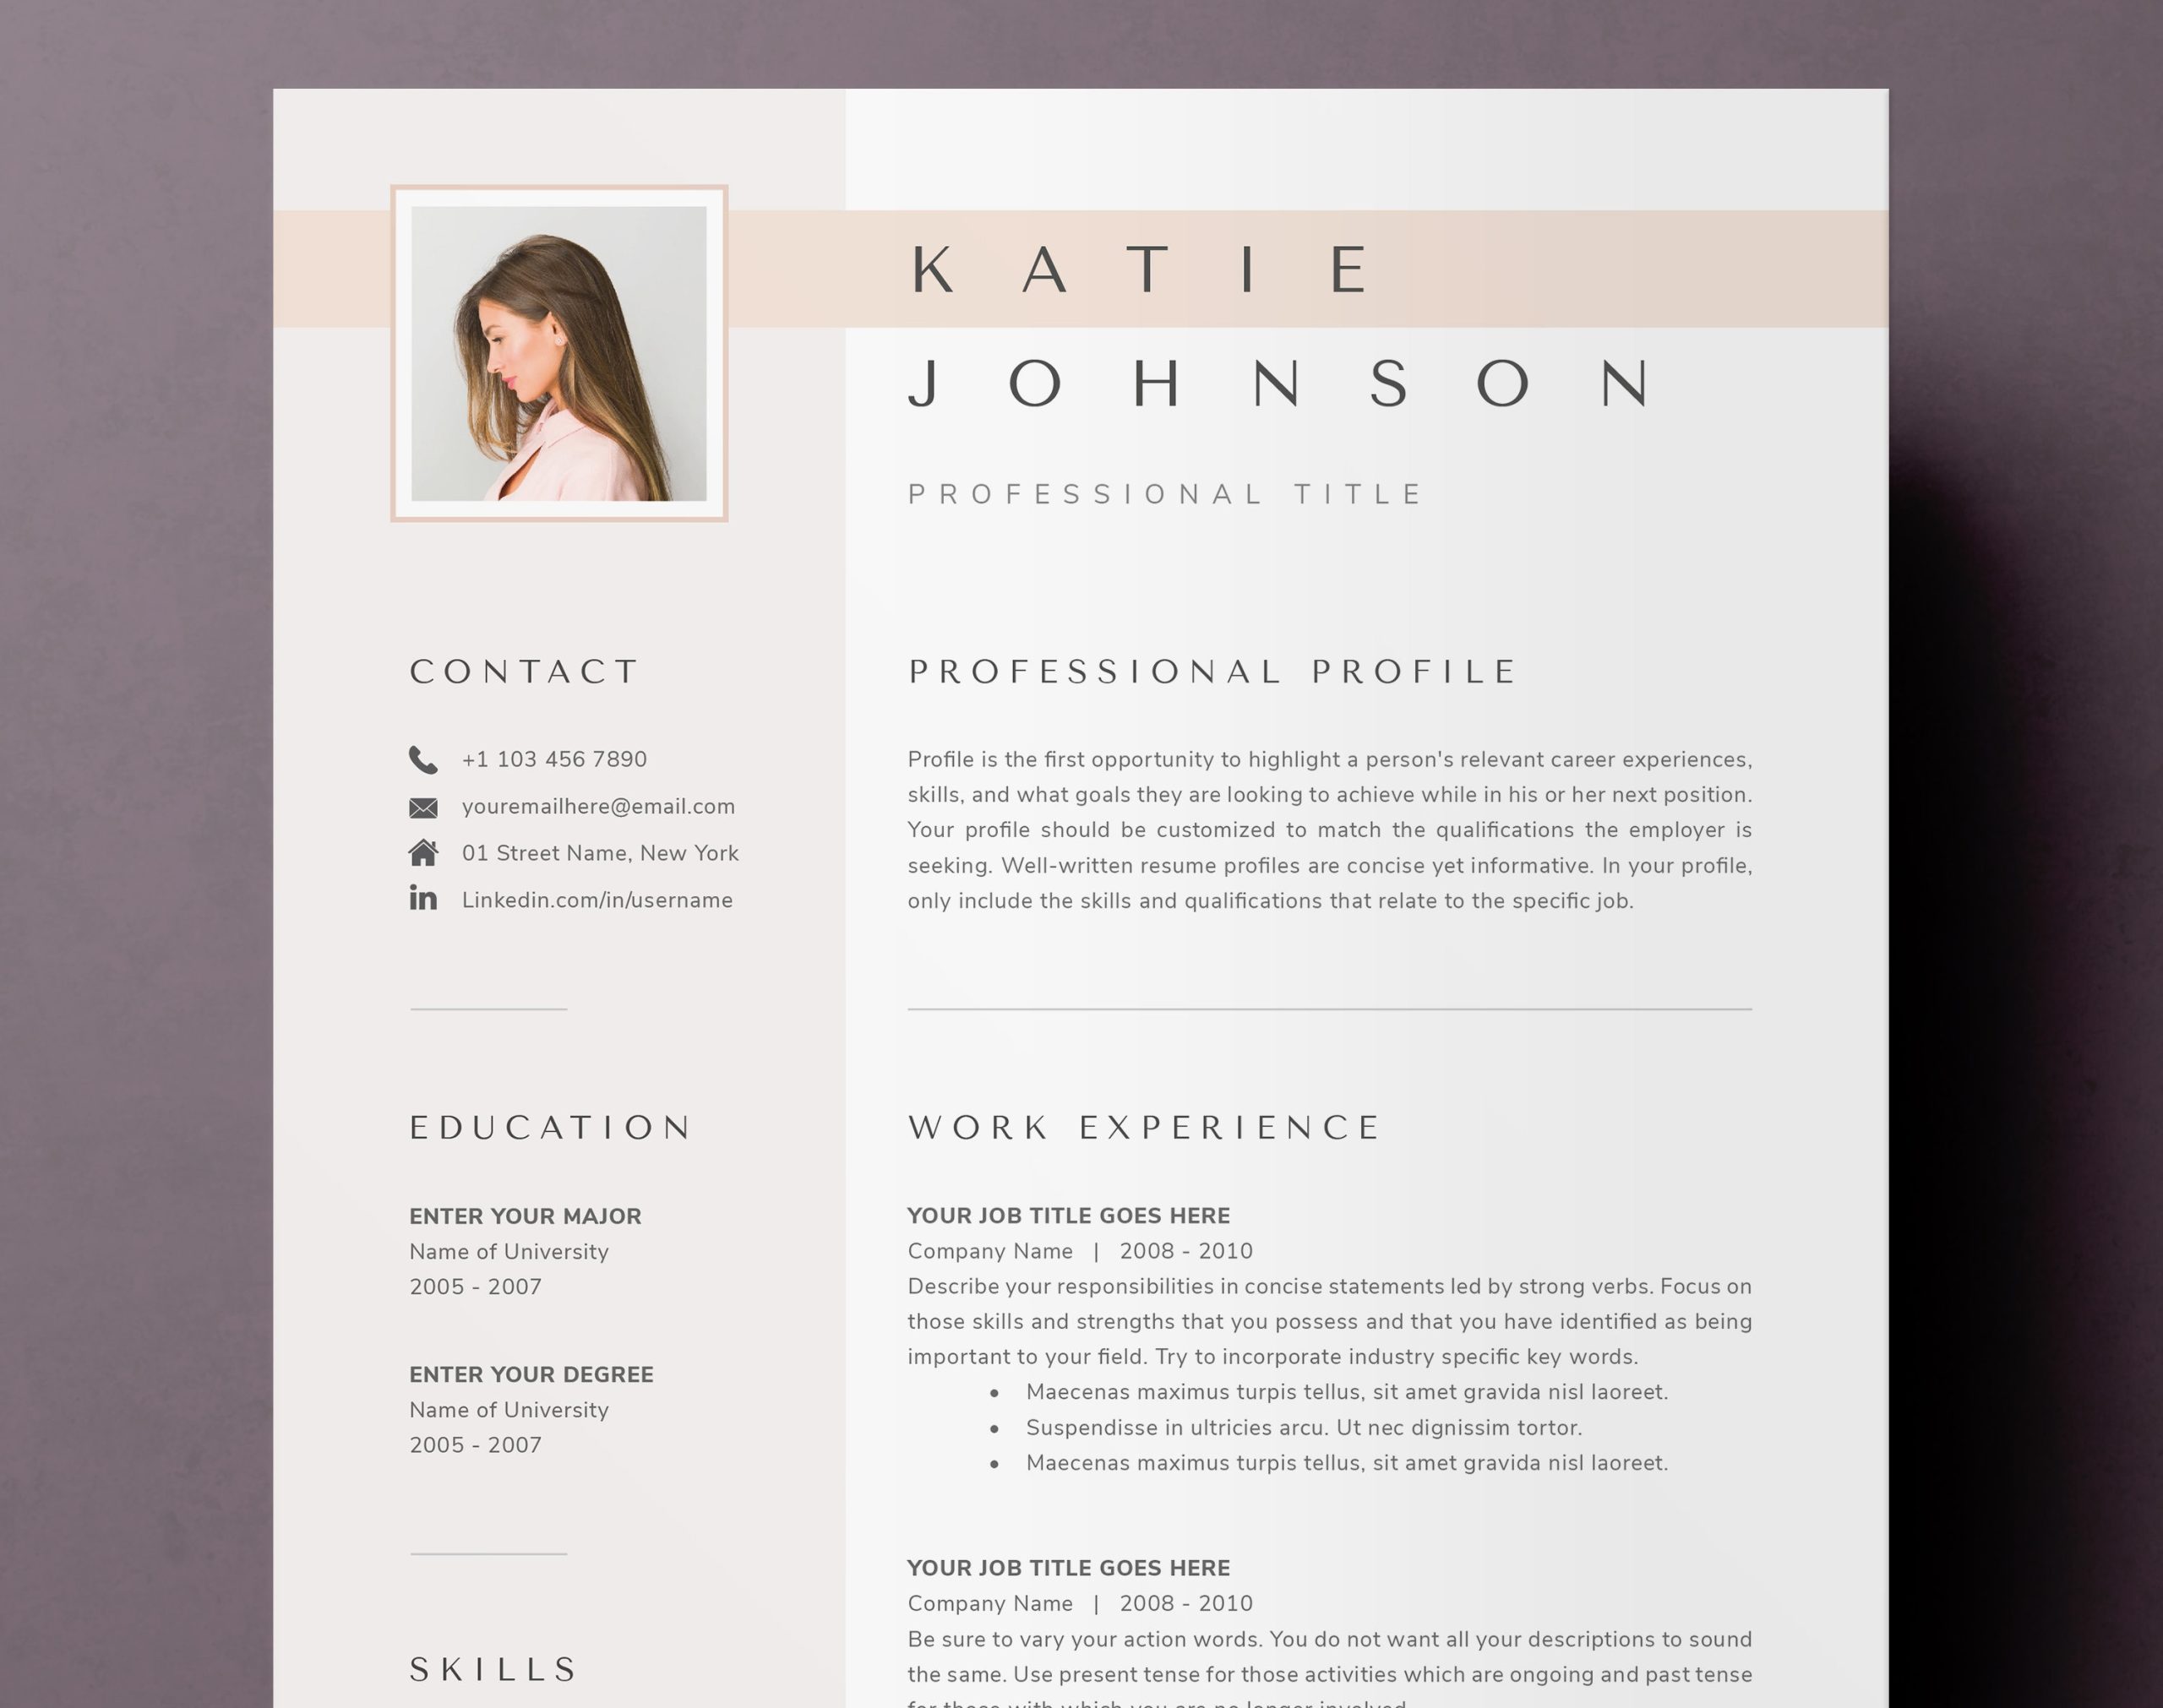 Bath and Body Works Resume Sample Resume Template with Photo for Microsoft Word and Pages Mac – Etsy